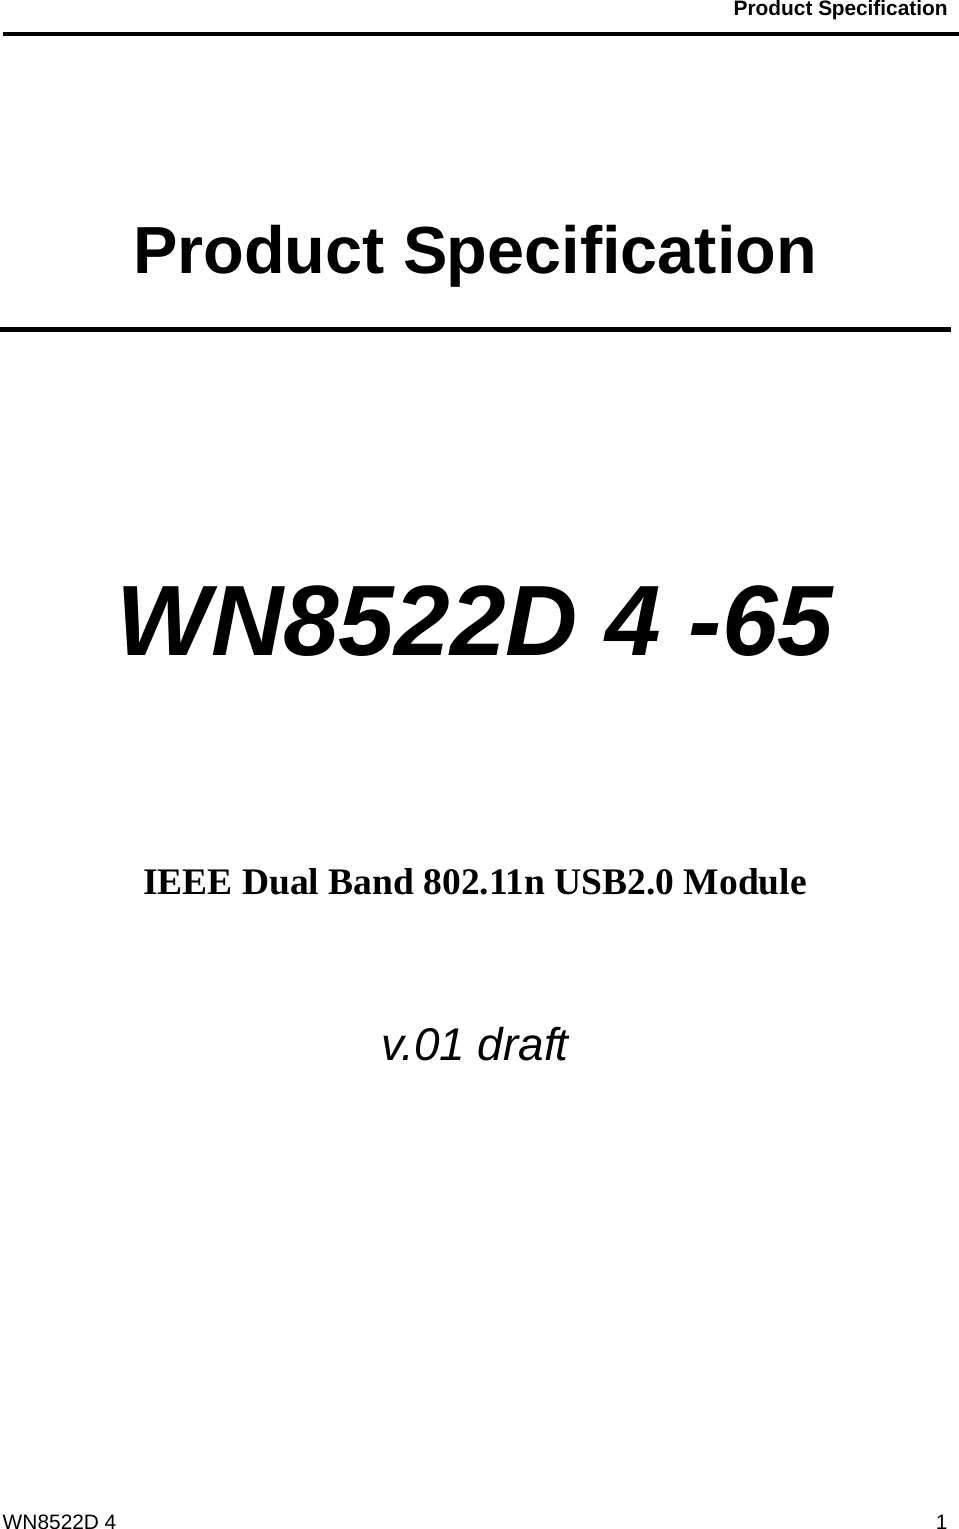                                           Product Specification                                              WN8522D 4  1 Product Specification   WN8522D 4 -65     IEEE Dual Band 802.11n USB2.0 Module  v.01 draft    